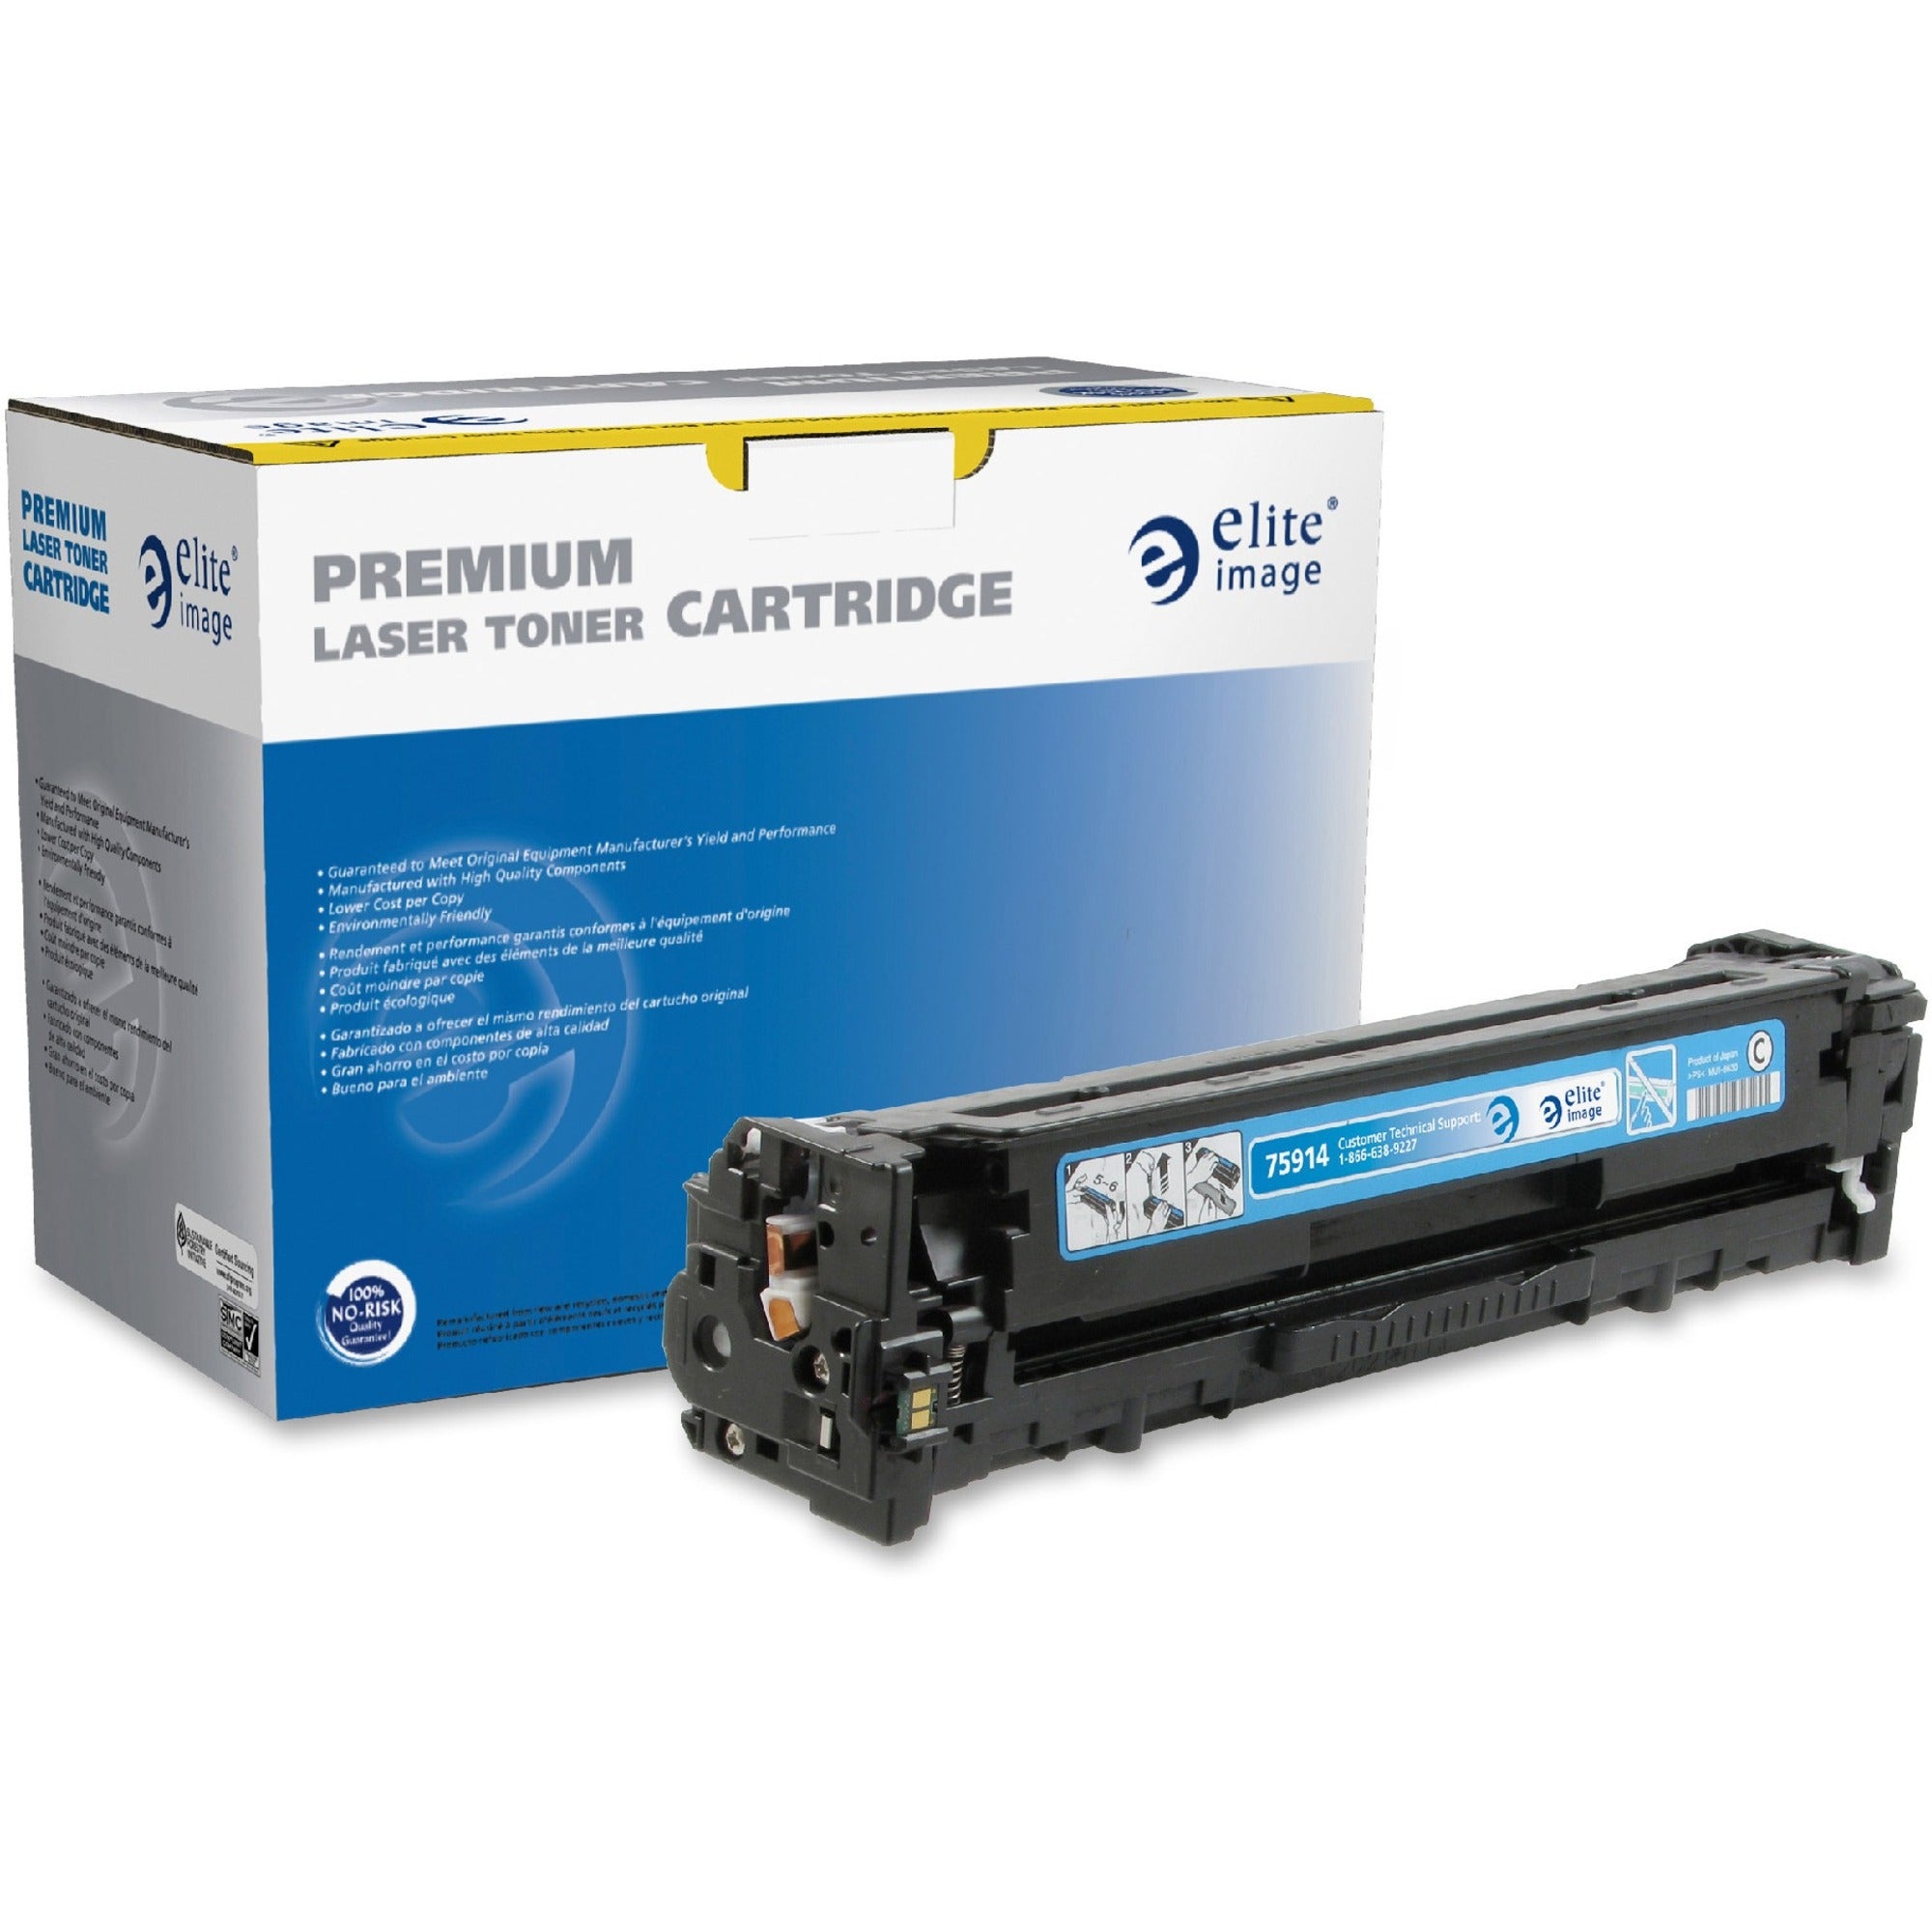 Elite Image Remanufactured Laser Toner Cartridge - Alternative for HP 131A (CF211A) - Cyan - 1 Each - 1800 Pages - 